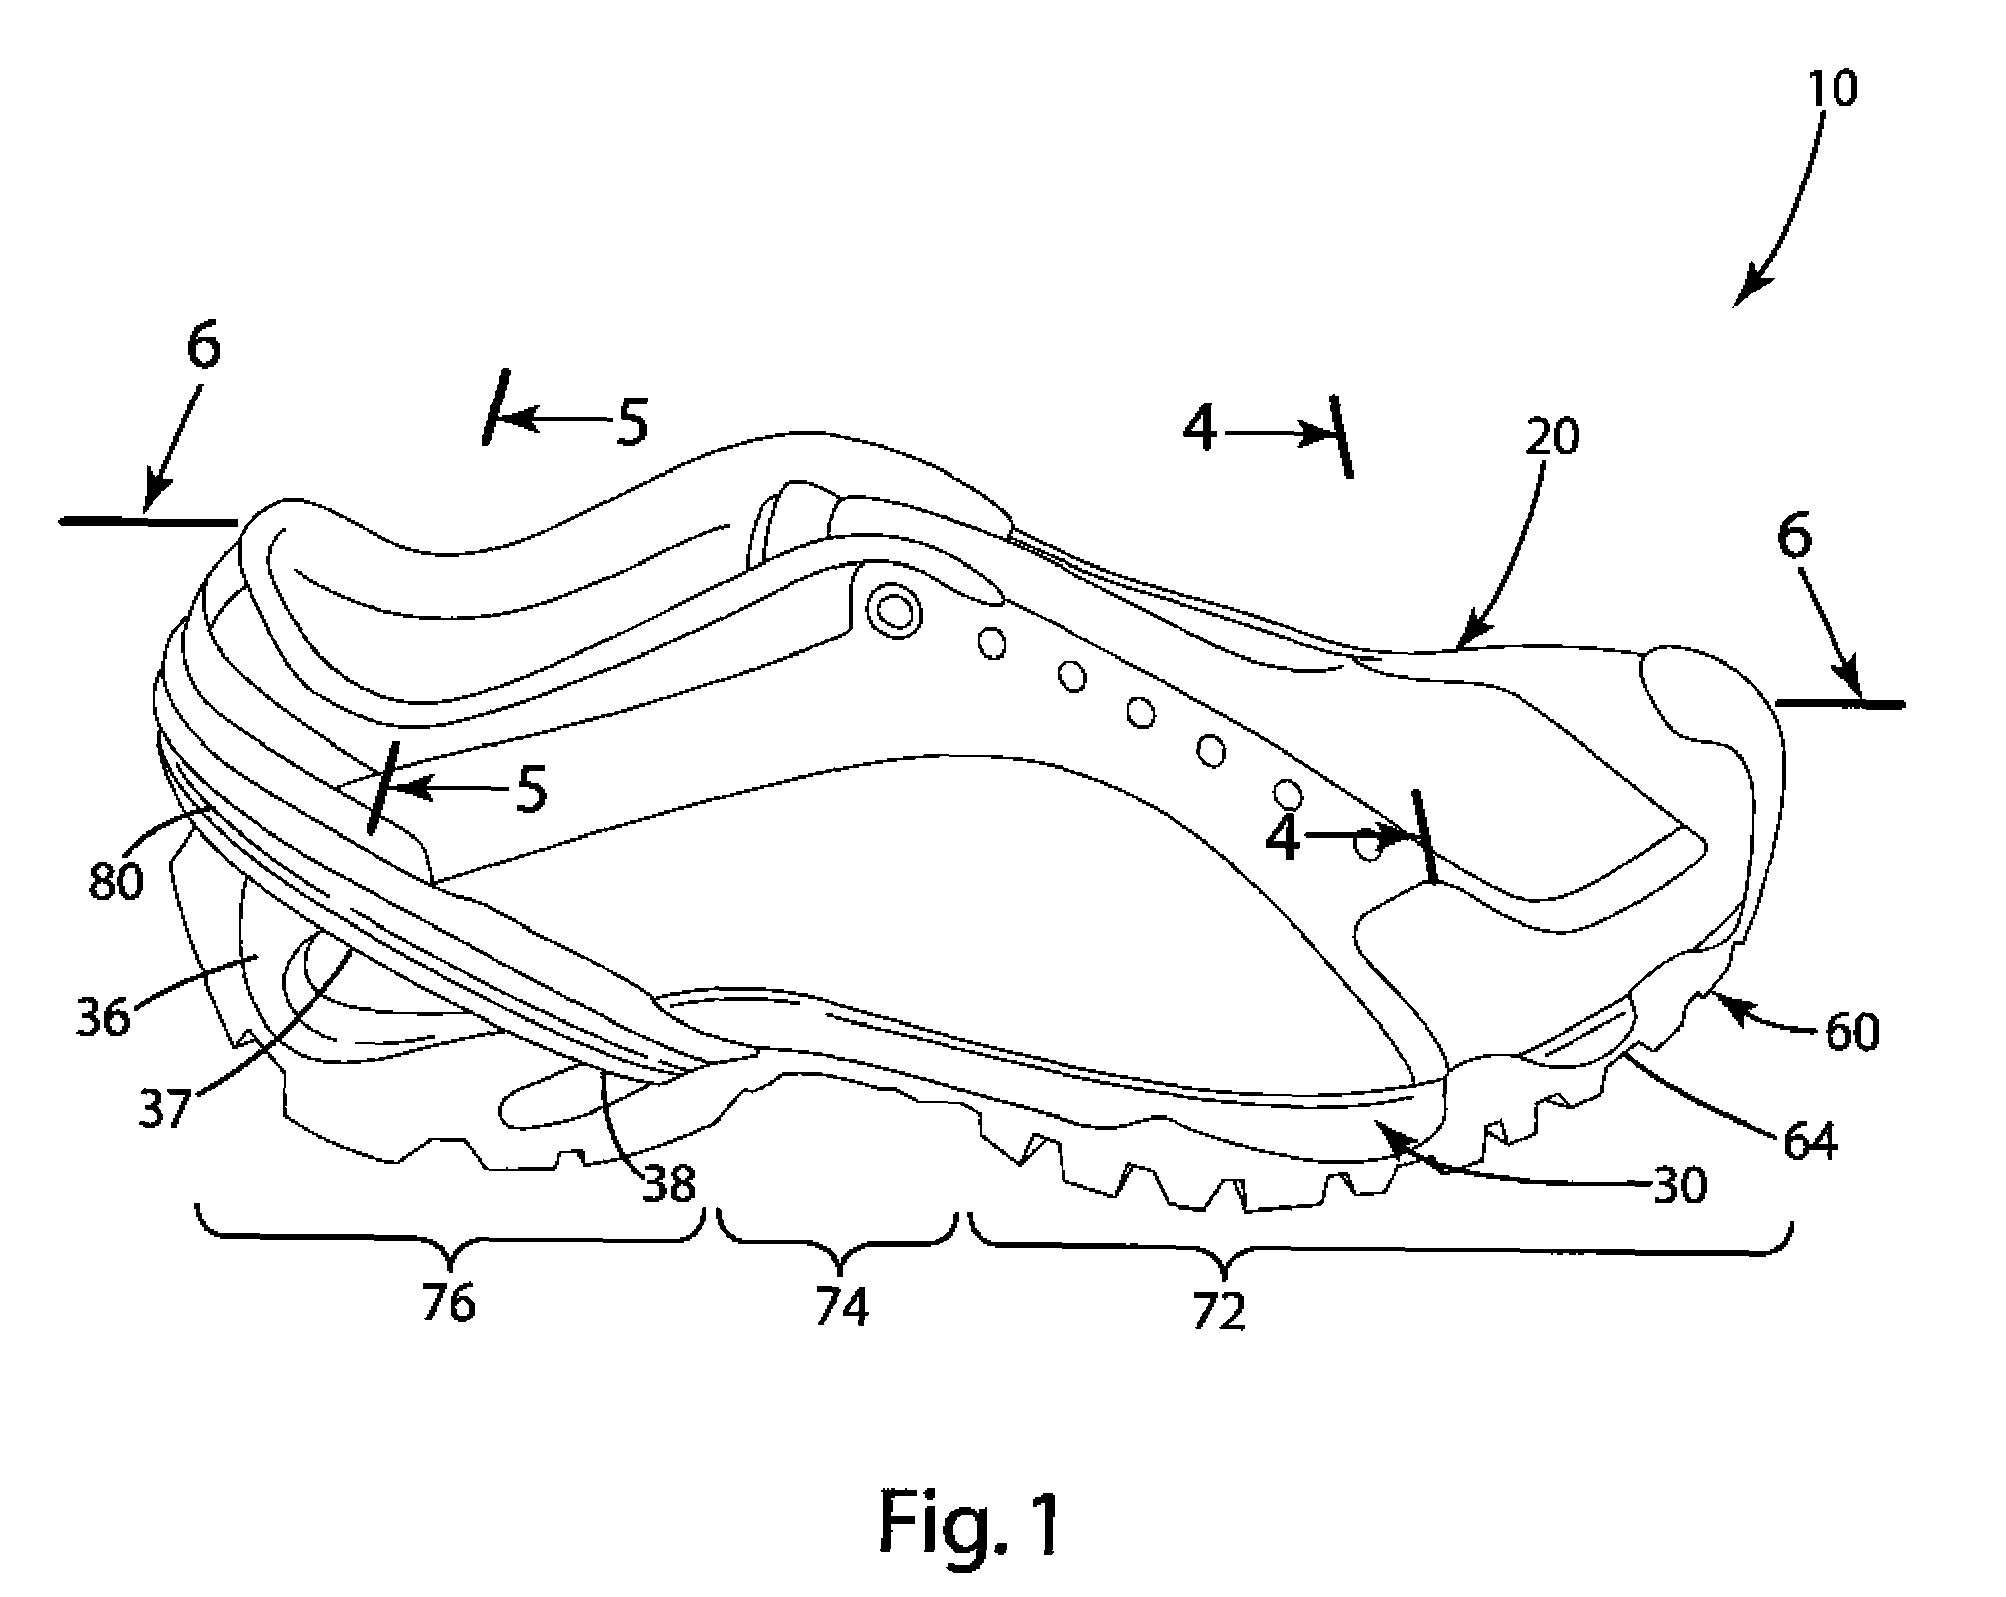 Footwear construction and related method of manufacture